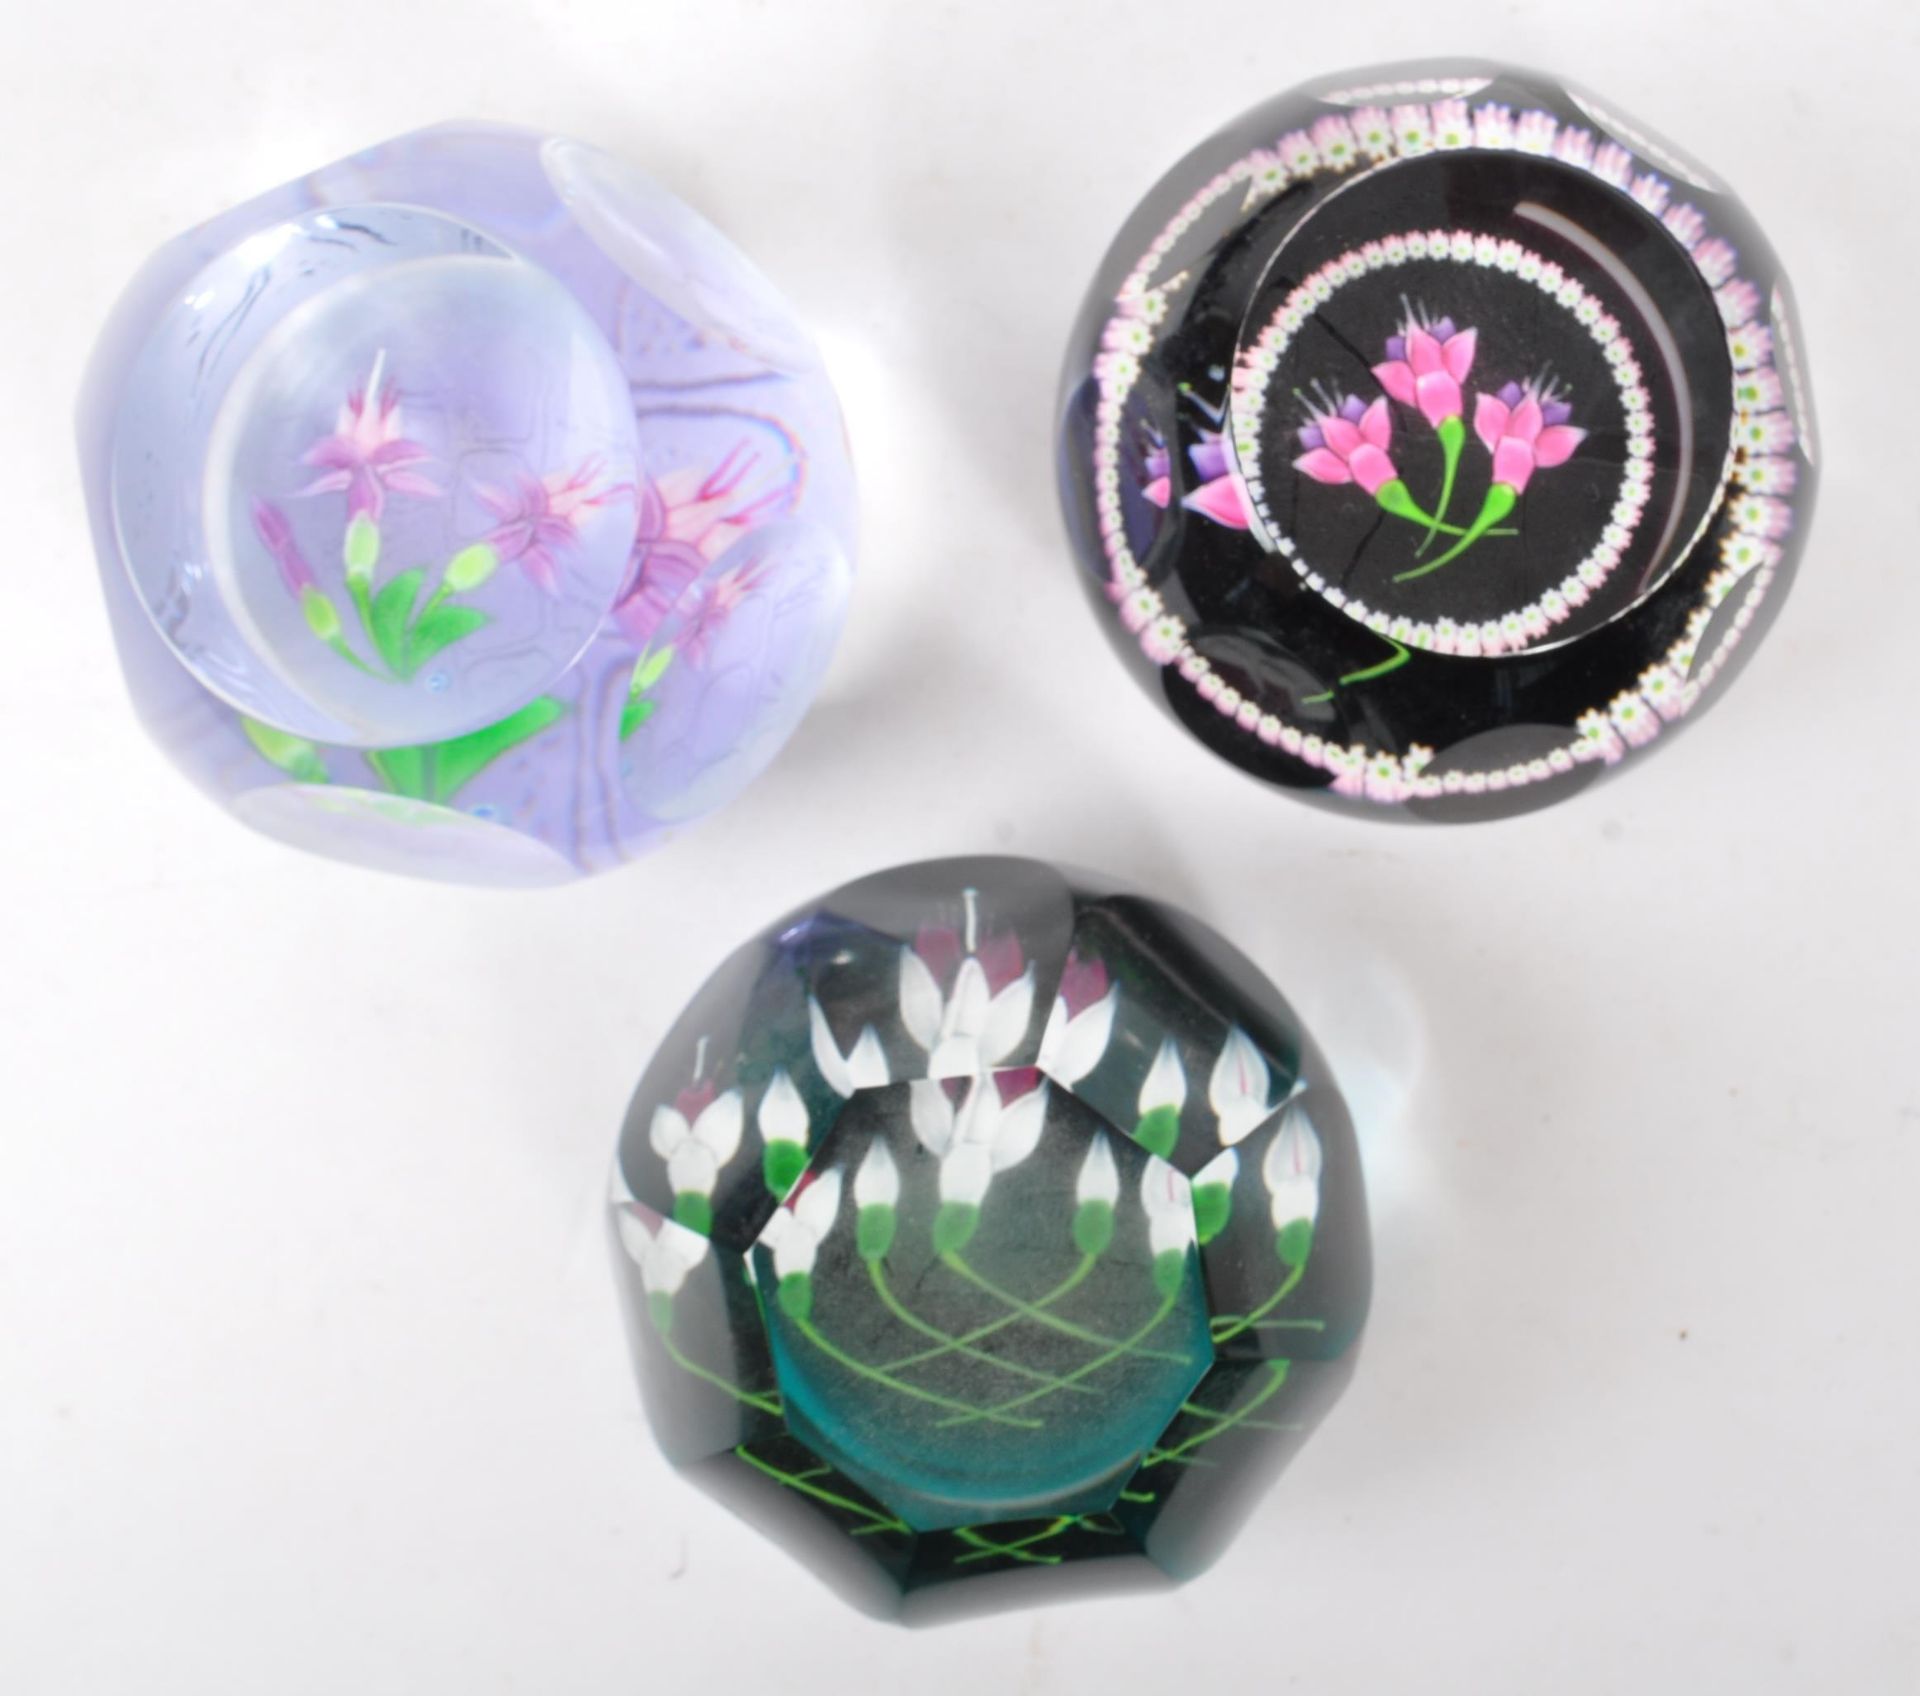 CAITHNESS - COLLECTION OF SCOTTISH CRYSTAL PAPERWEIGHTS - Image 3 of 10